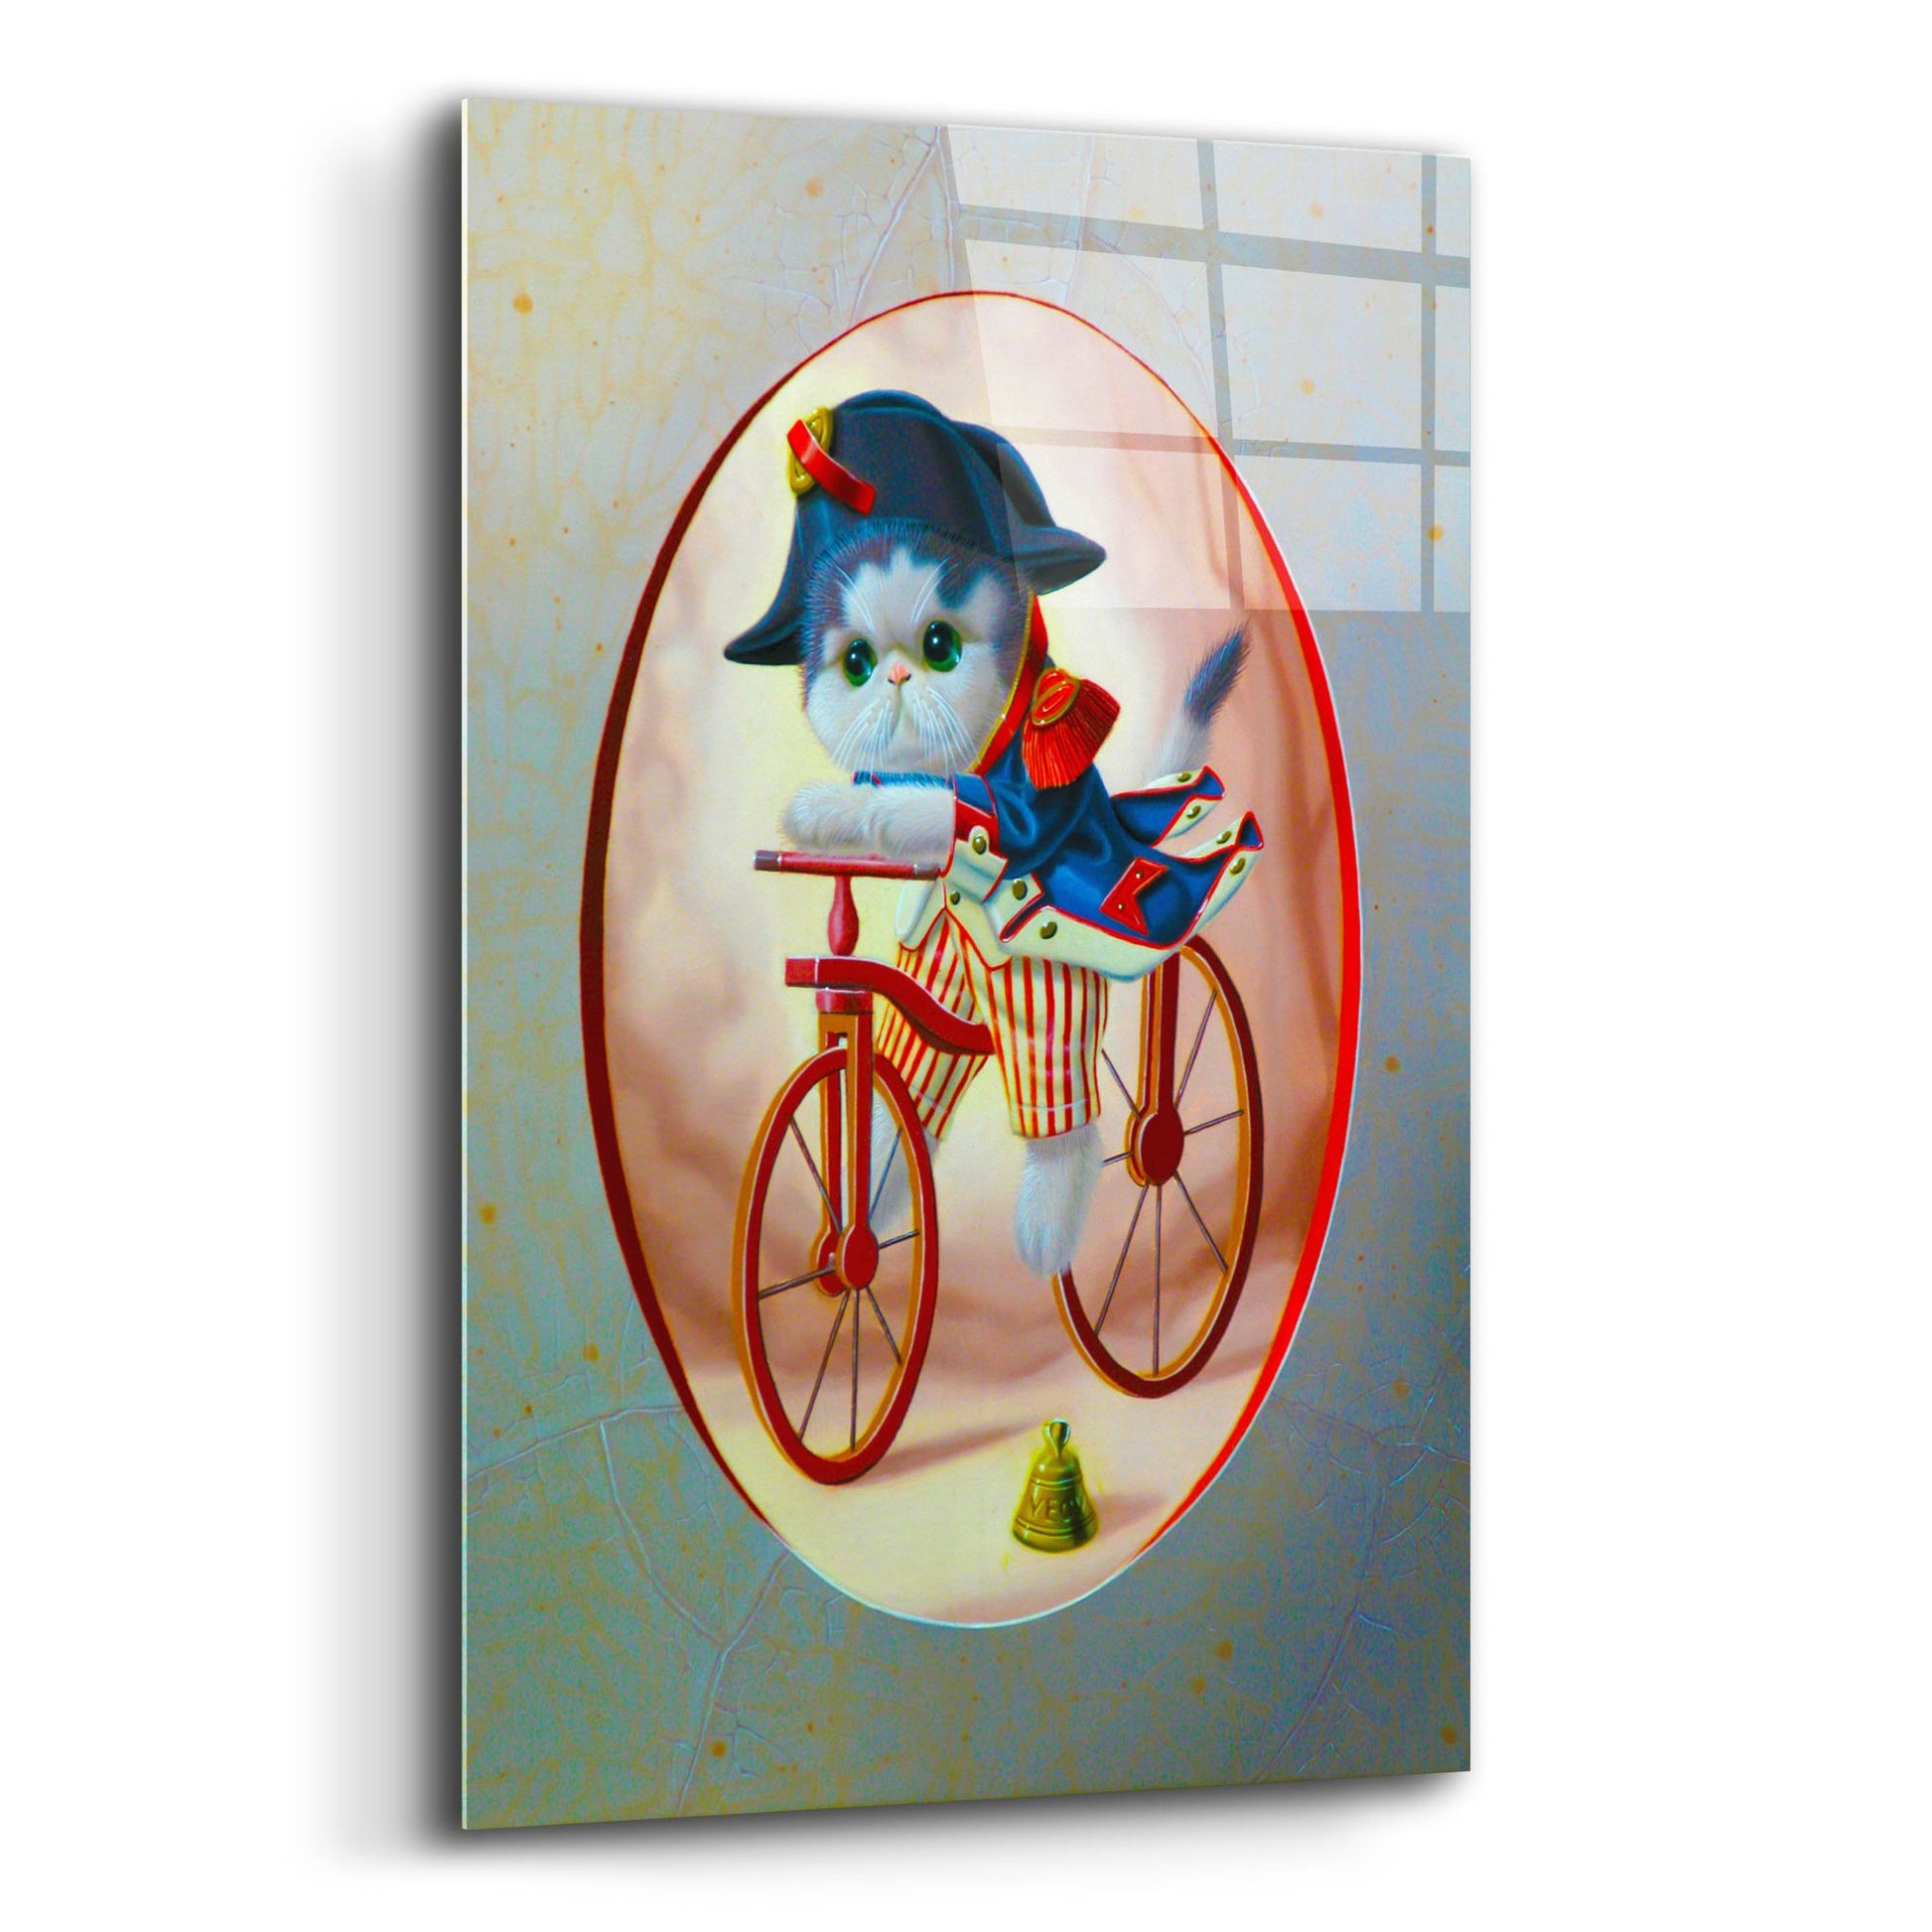 Epic Art 'National Guard At Cycle N2' by Valery Vecu Quitard, Acrylic Glass Wall Art,12x16